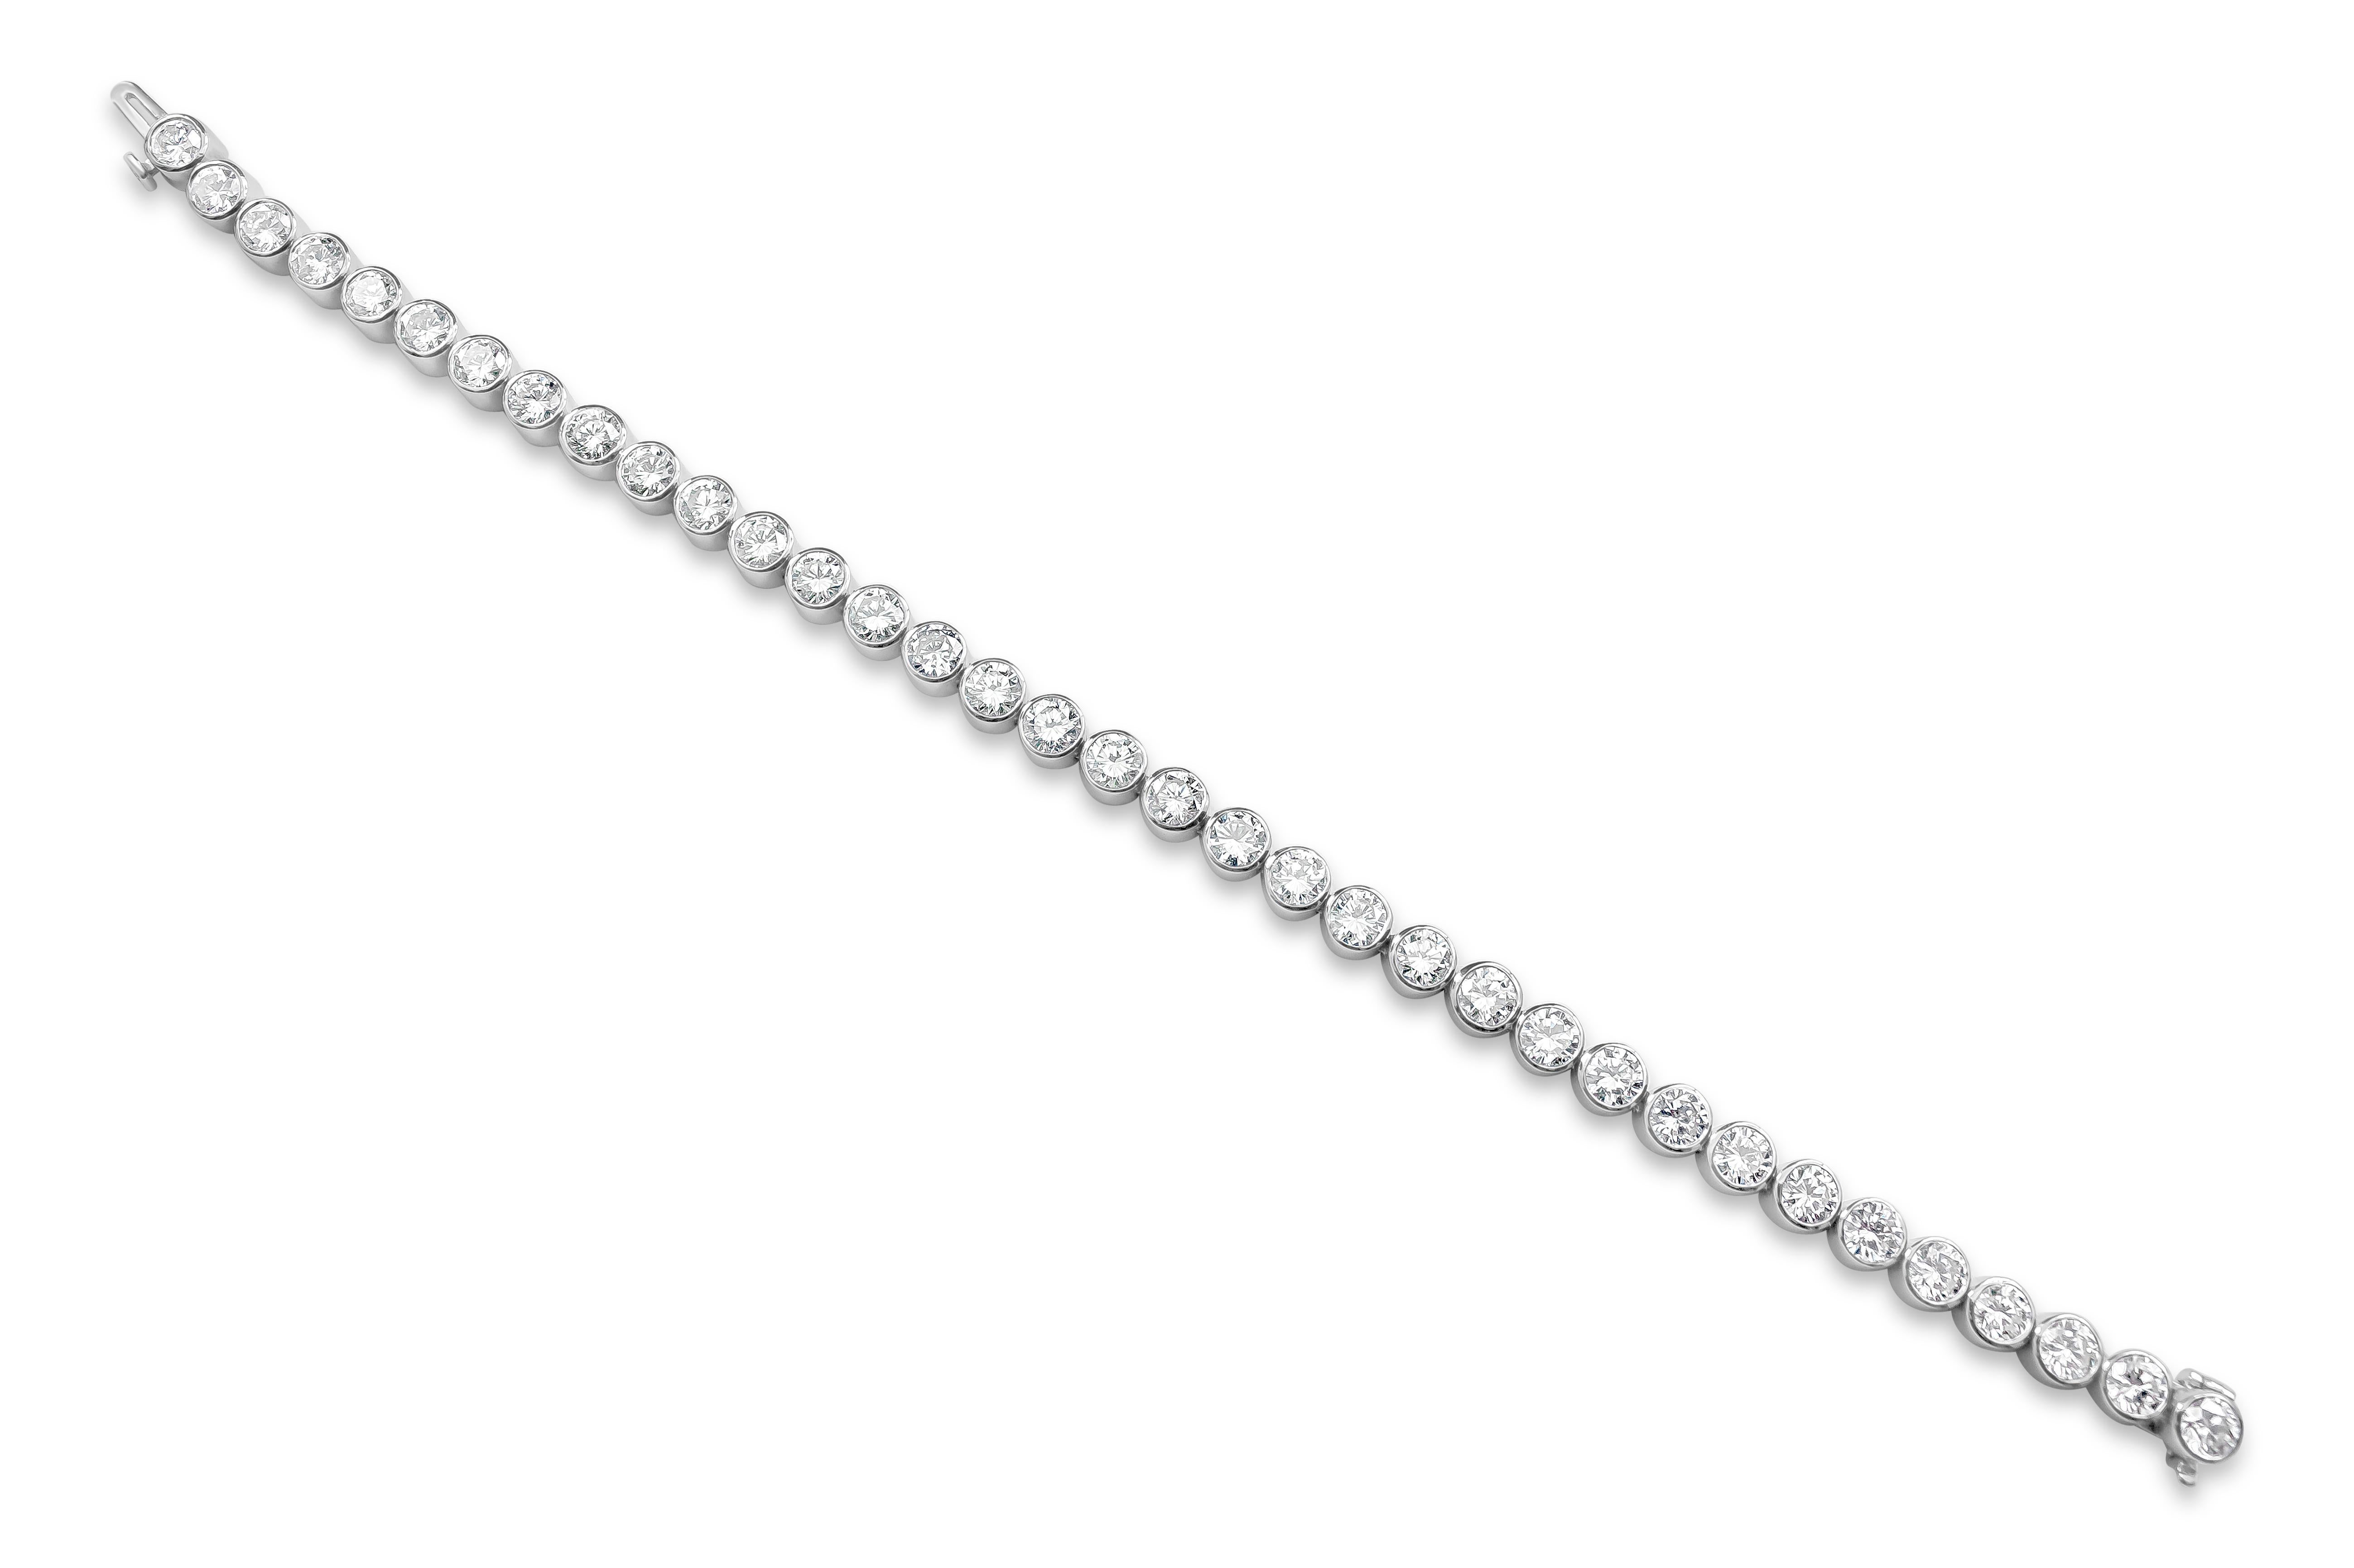 A classic tennis bracelet style set with round brilliant diamonds, Diamonds weigh 11.02 carat total, H-I color and VS1-SI1 in clarity. Bezel set in 18 karat white gold.

Roman Malakov is a custom house, specializing in creating anything you can